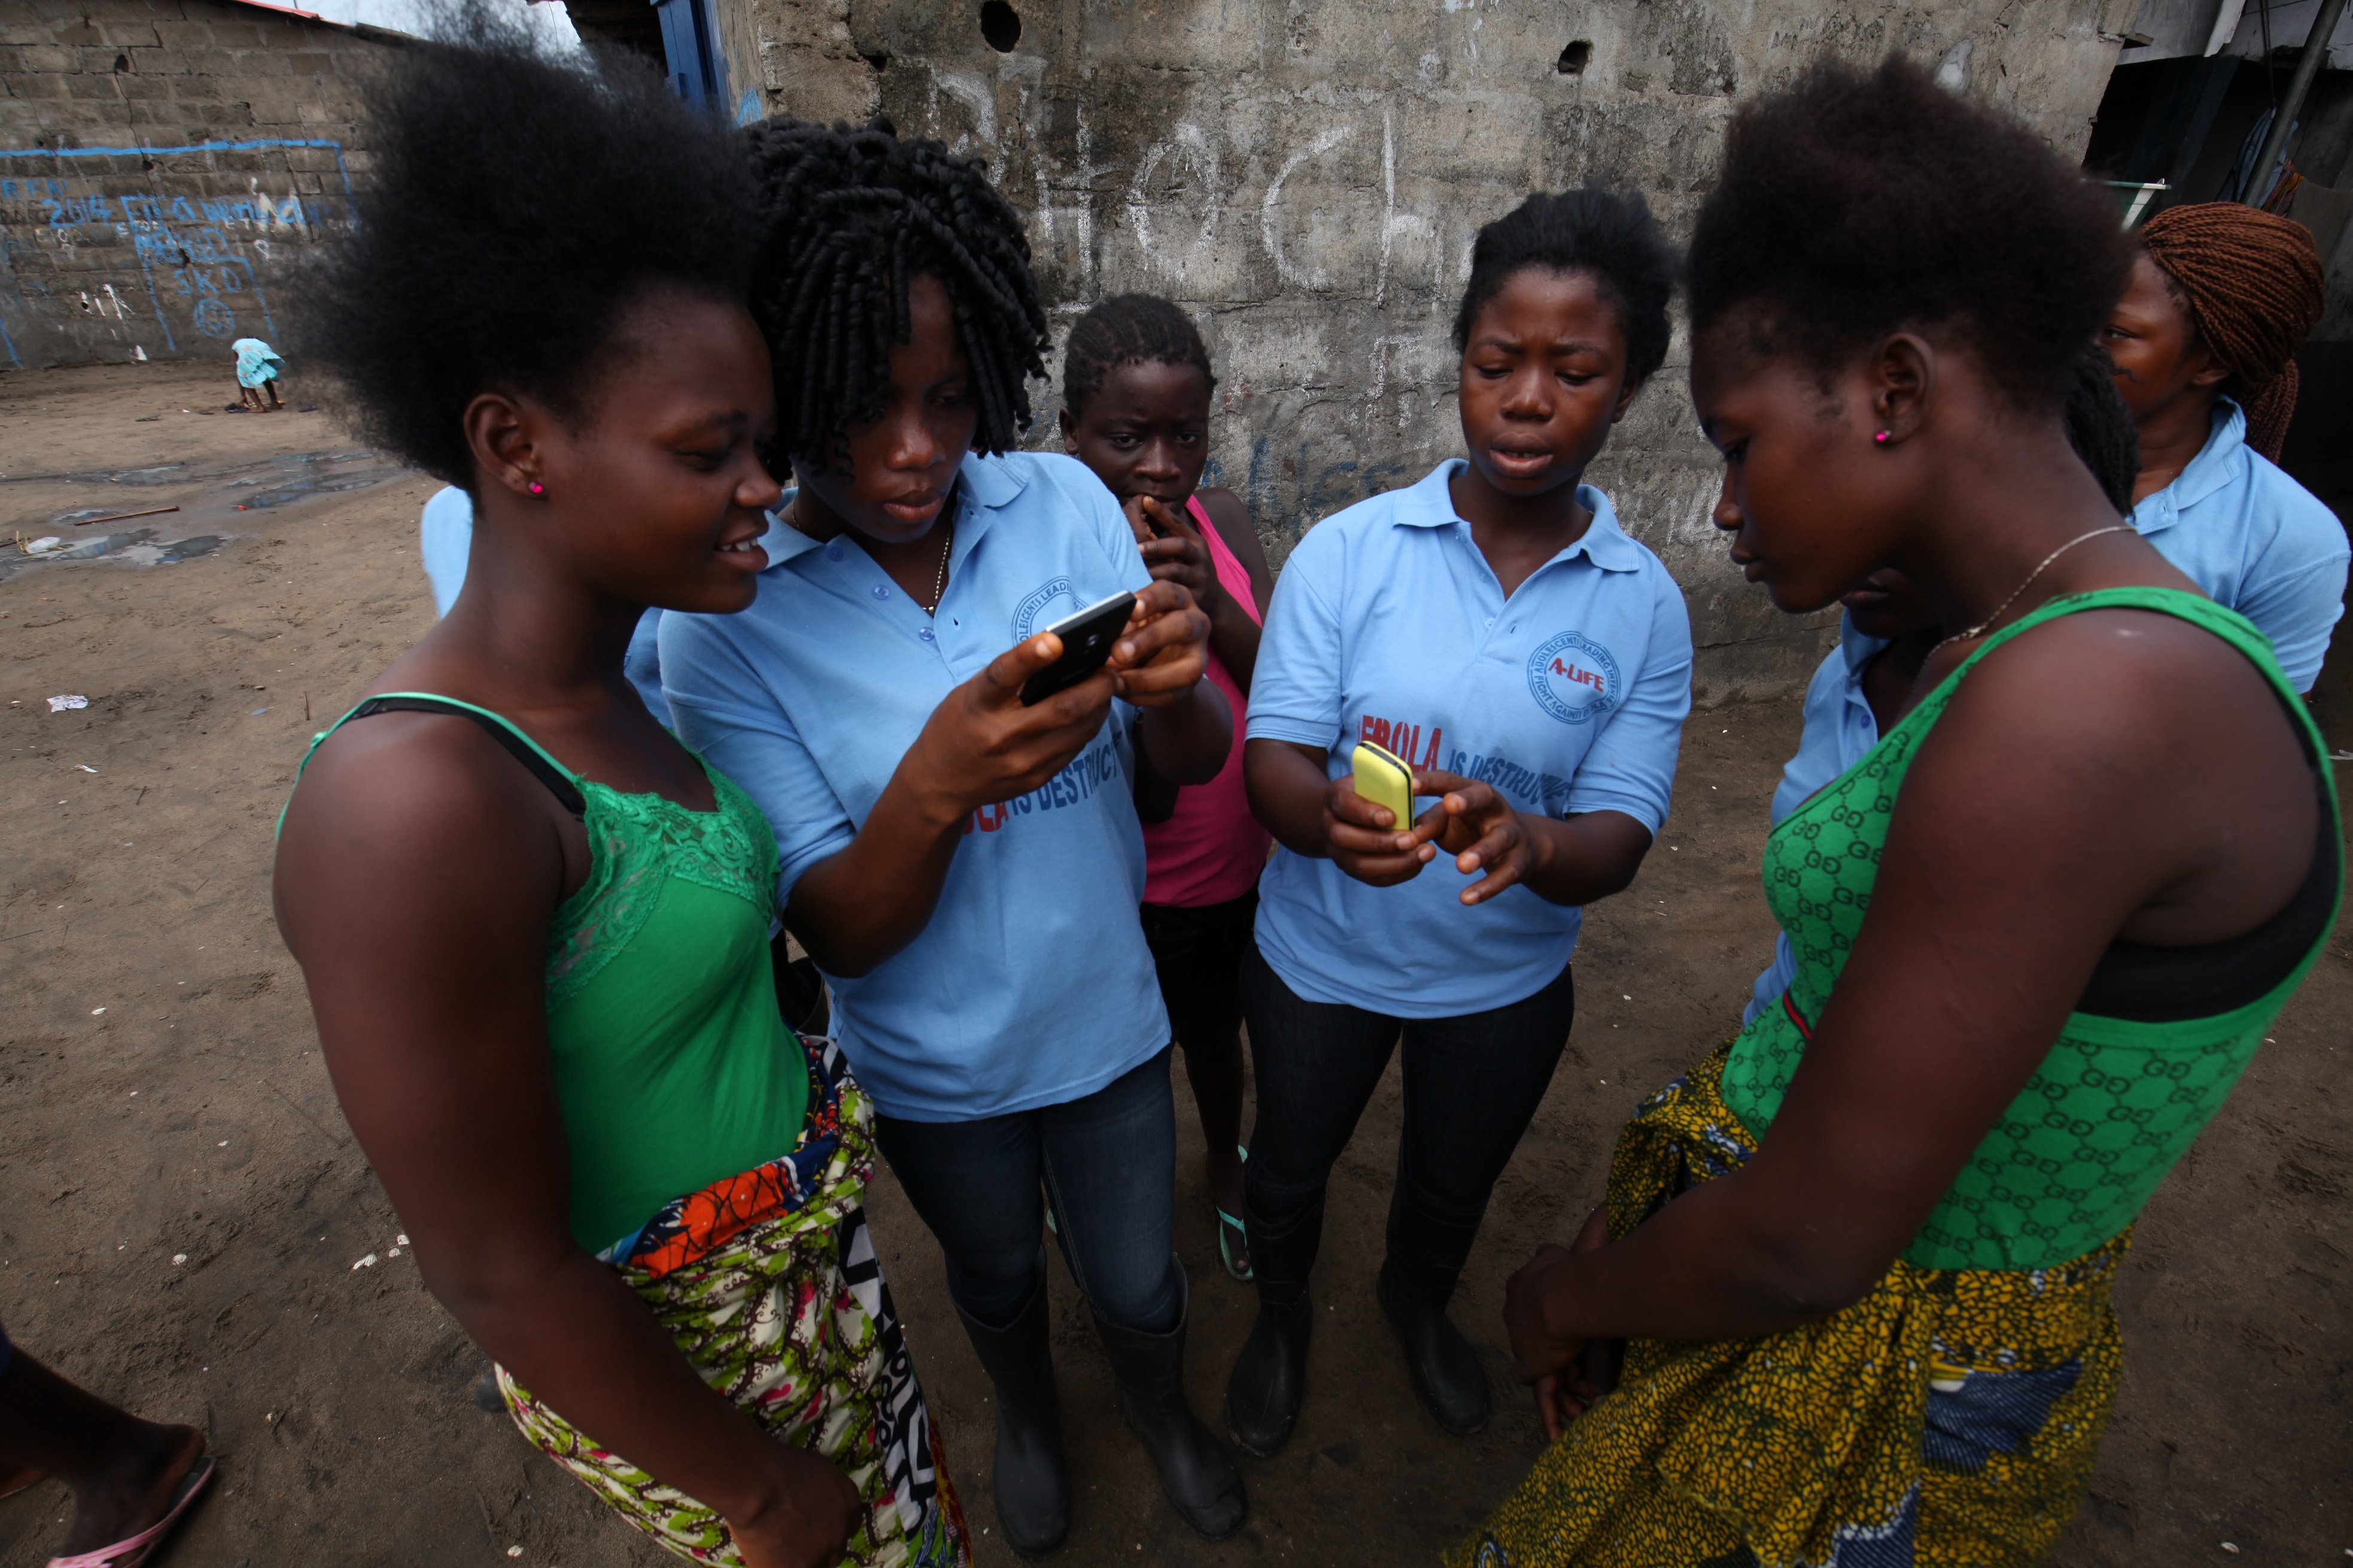 Volunteers from the A-Life adolescents group help youth in West Point, Monrovia, Liberia register on U-Report, a sms-based platform that enables over 71,000 youth to receive information and share issues that are relevant to them.